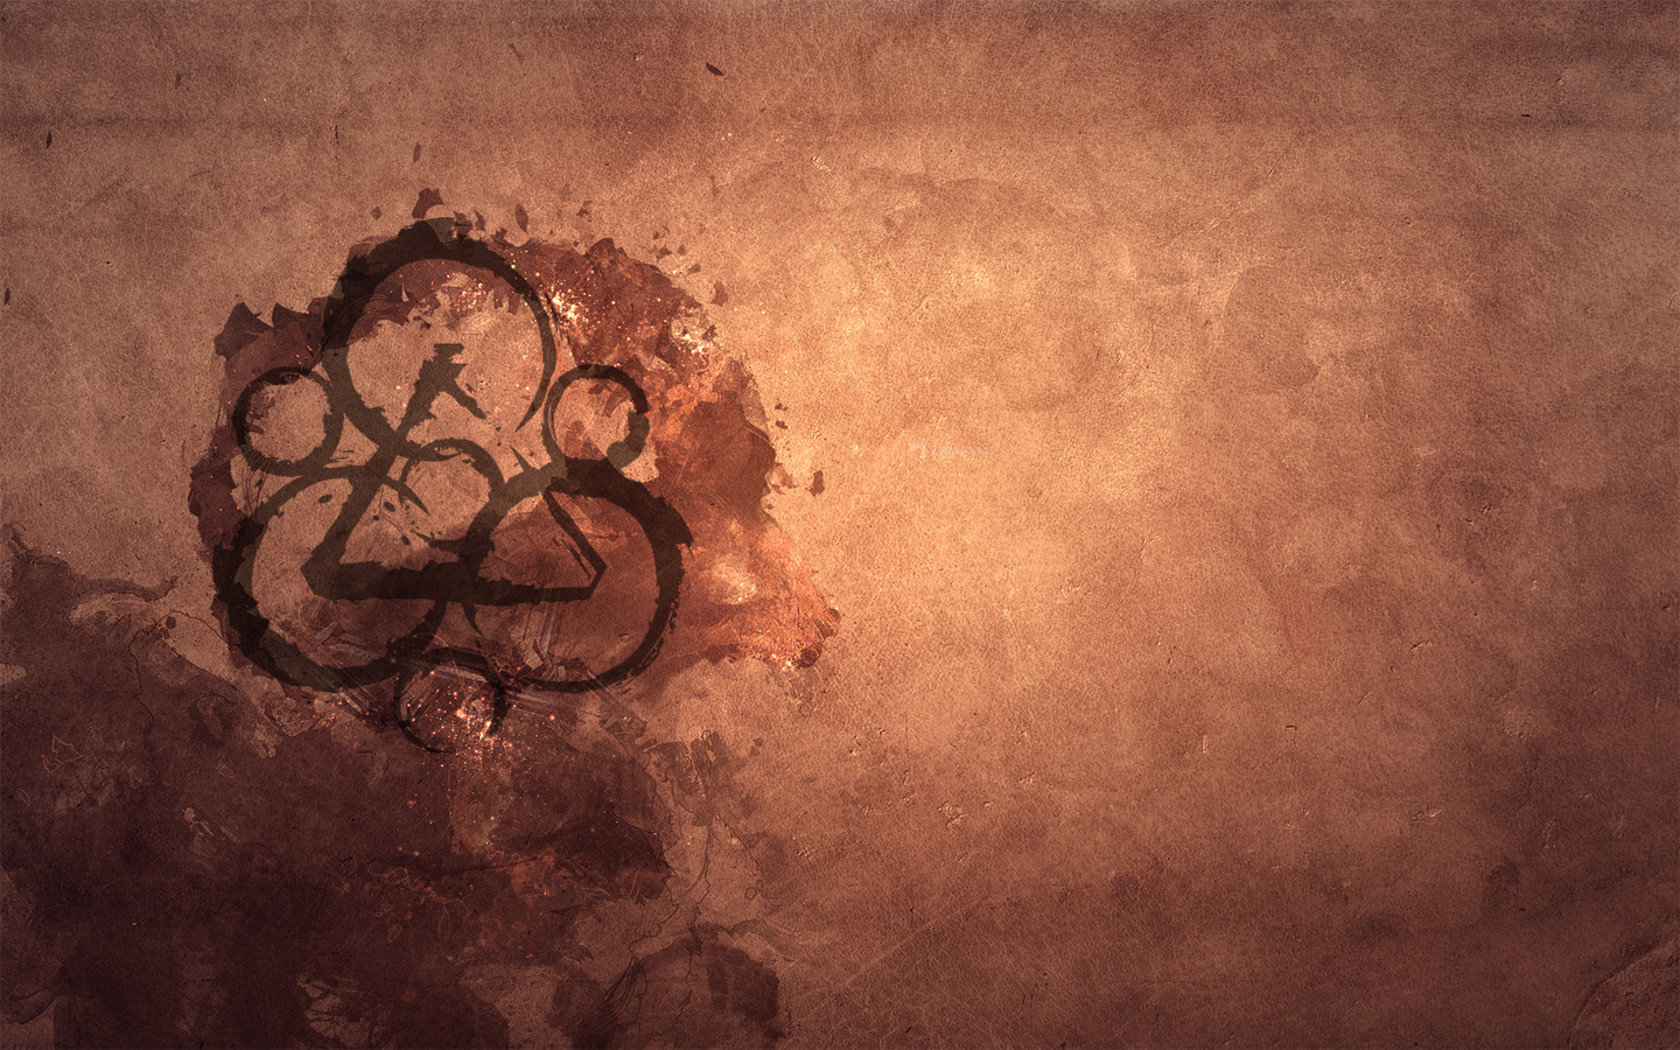 Coheed and Cambria HD Wallpapers and Backgrounds